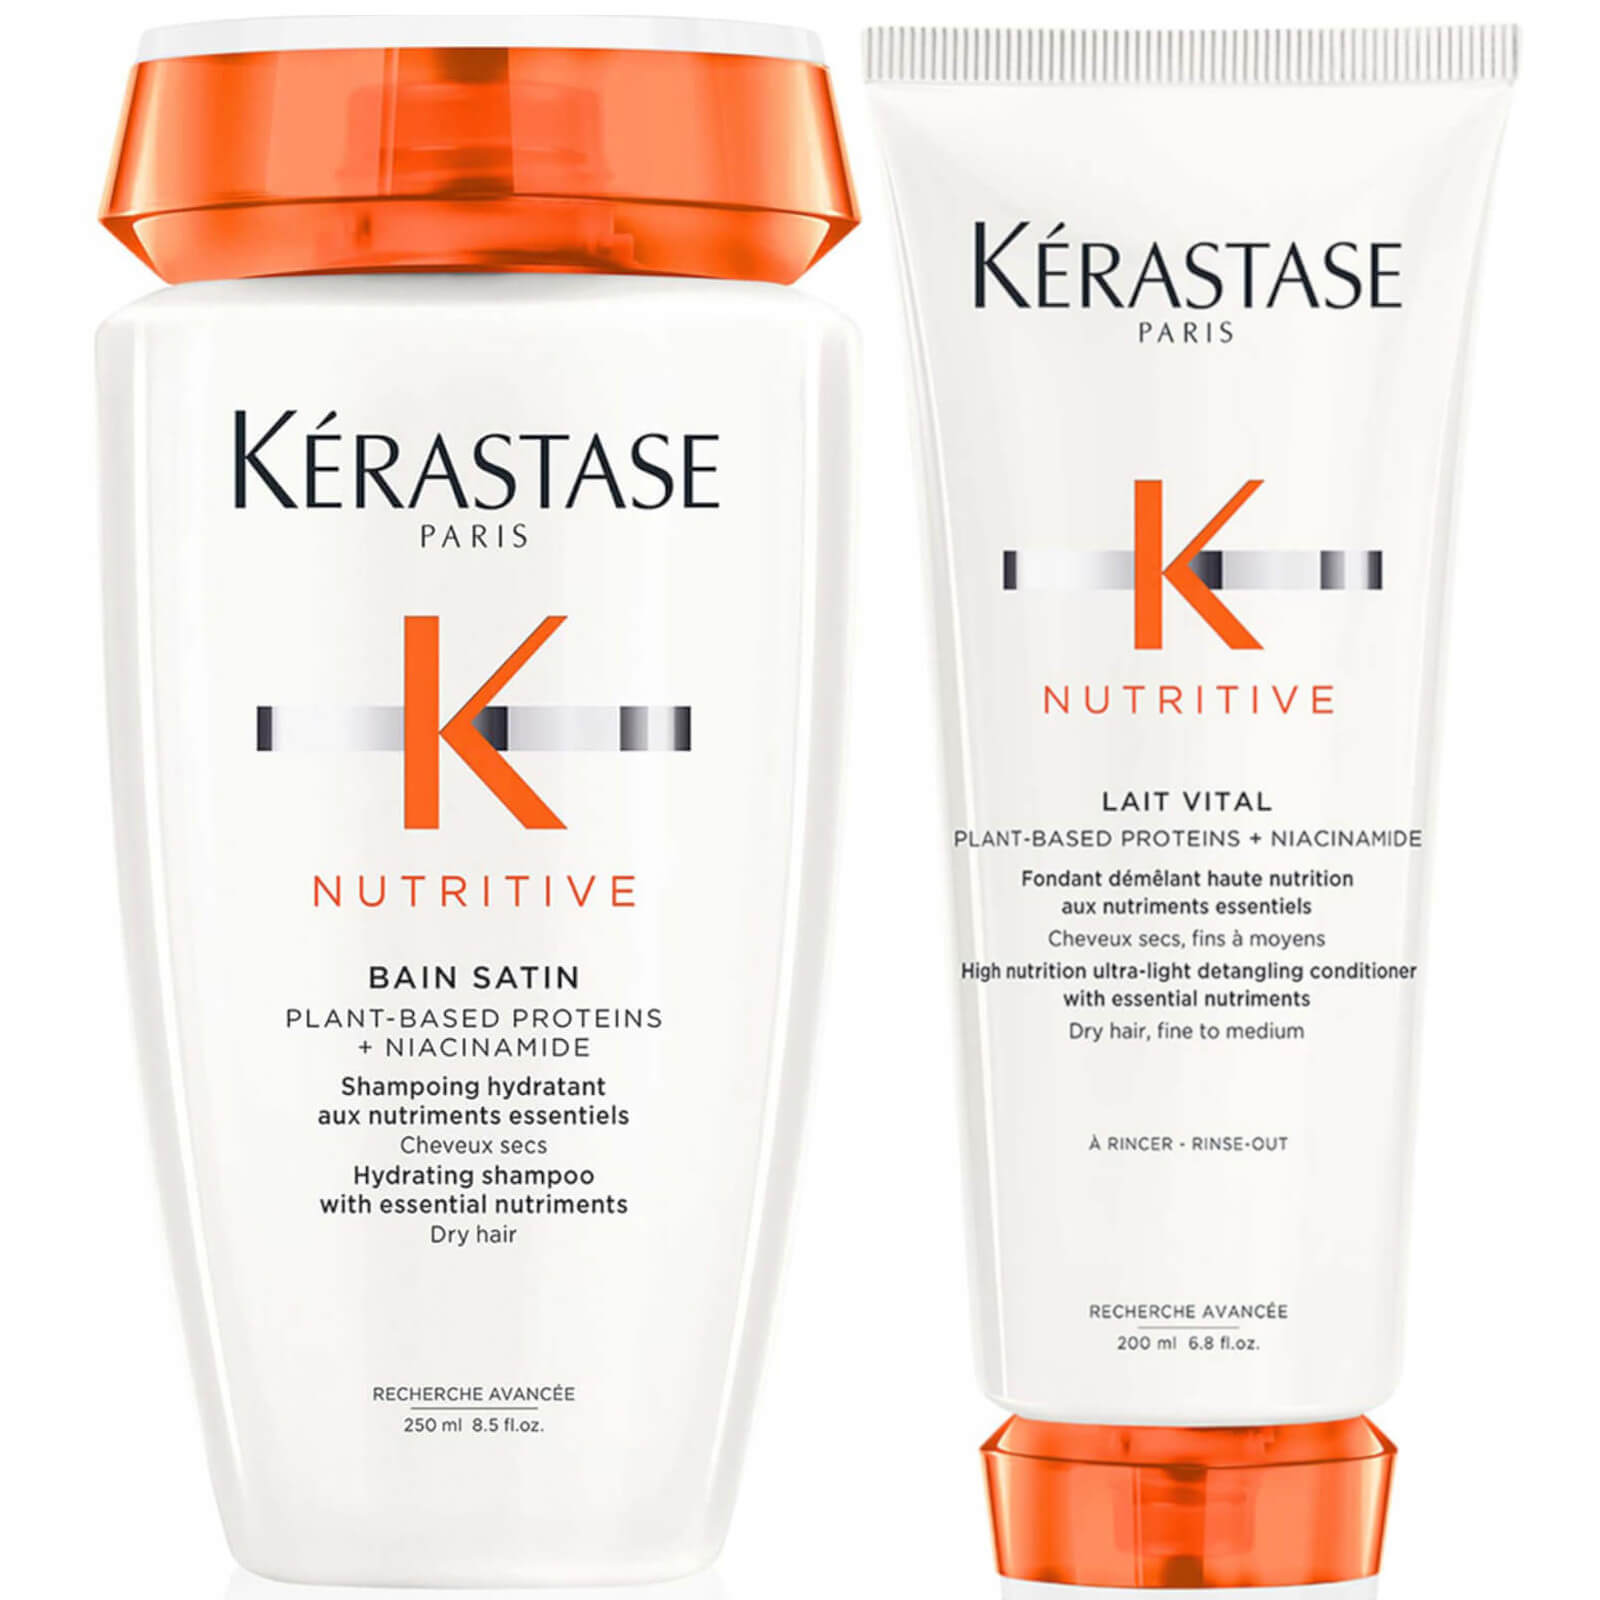 Kerastase Nutritive Nourish and Hydrate Shampoo and Conditioner Duo for Fine-Medium Dry Hair